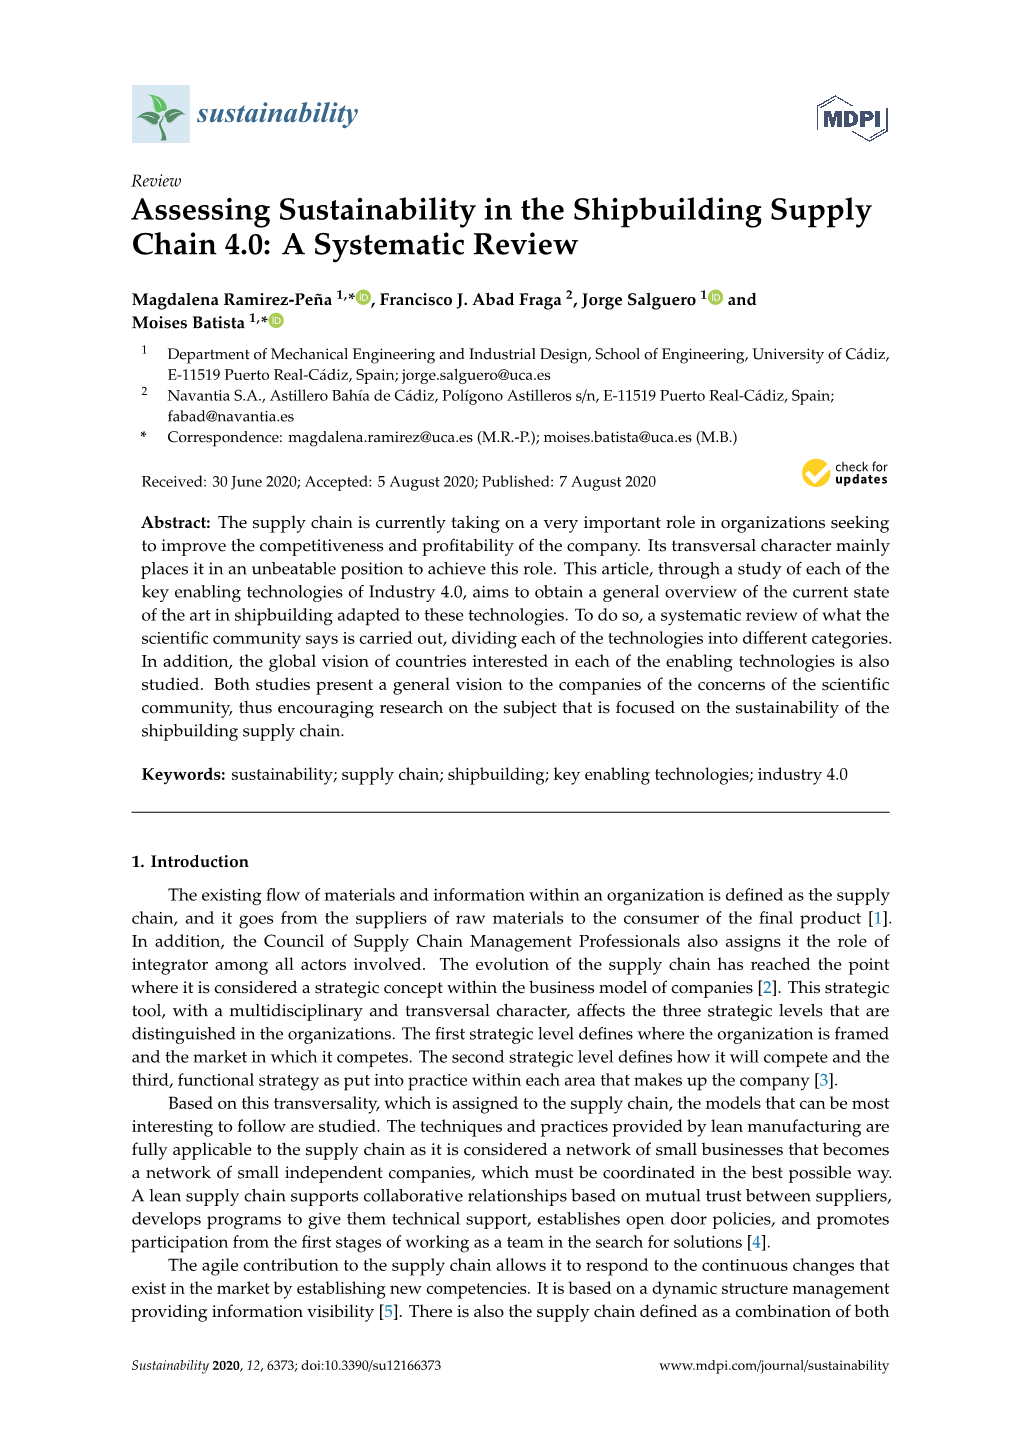 Assessing Sustainability in the Shipbuilding Supply Chain 4.0: a Systematic Review